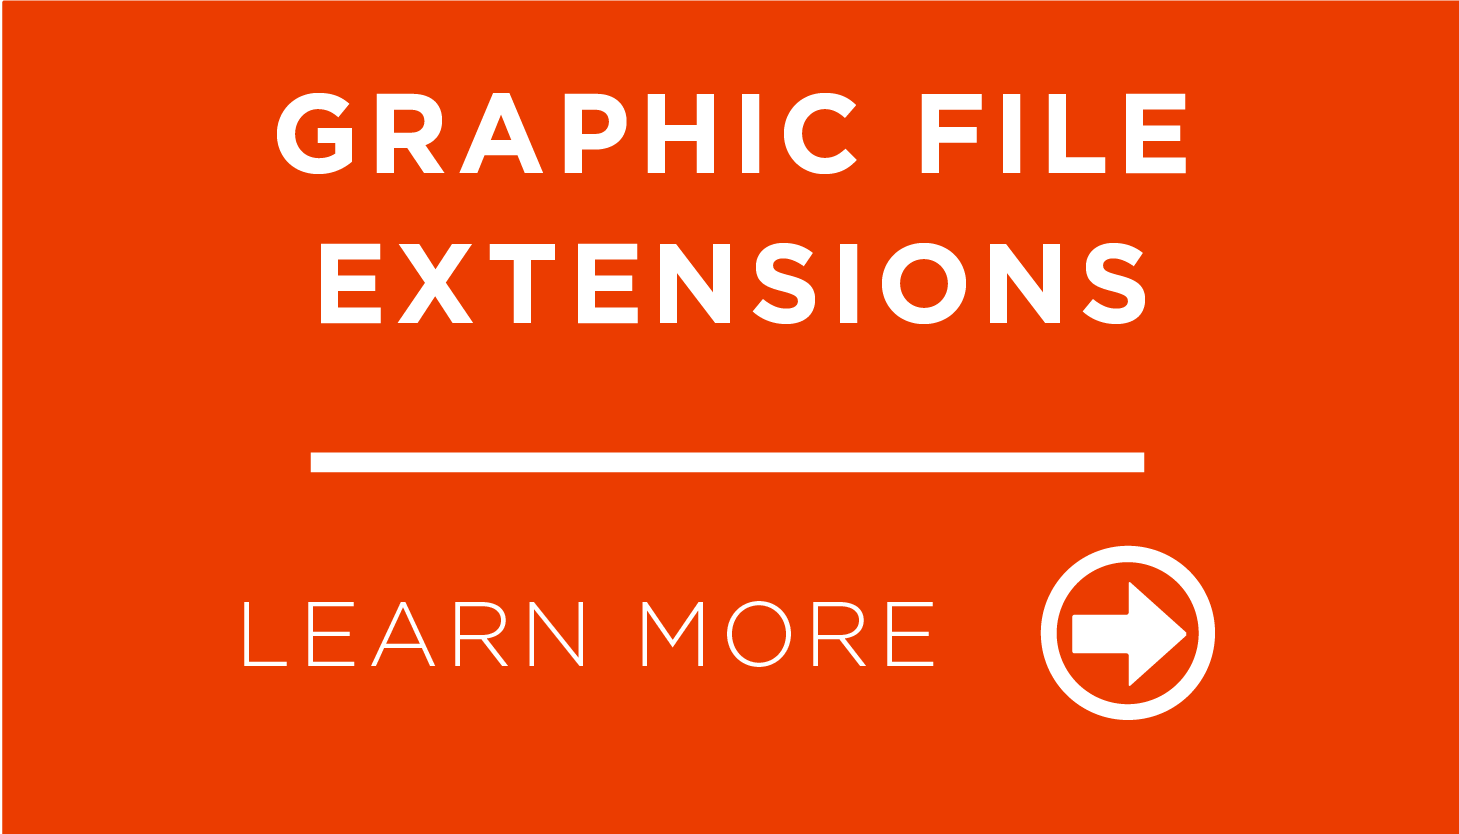 Graphic File Extensions